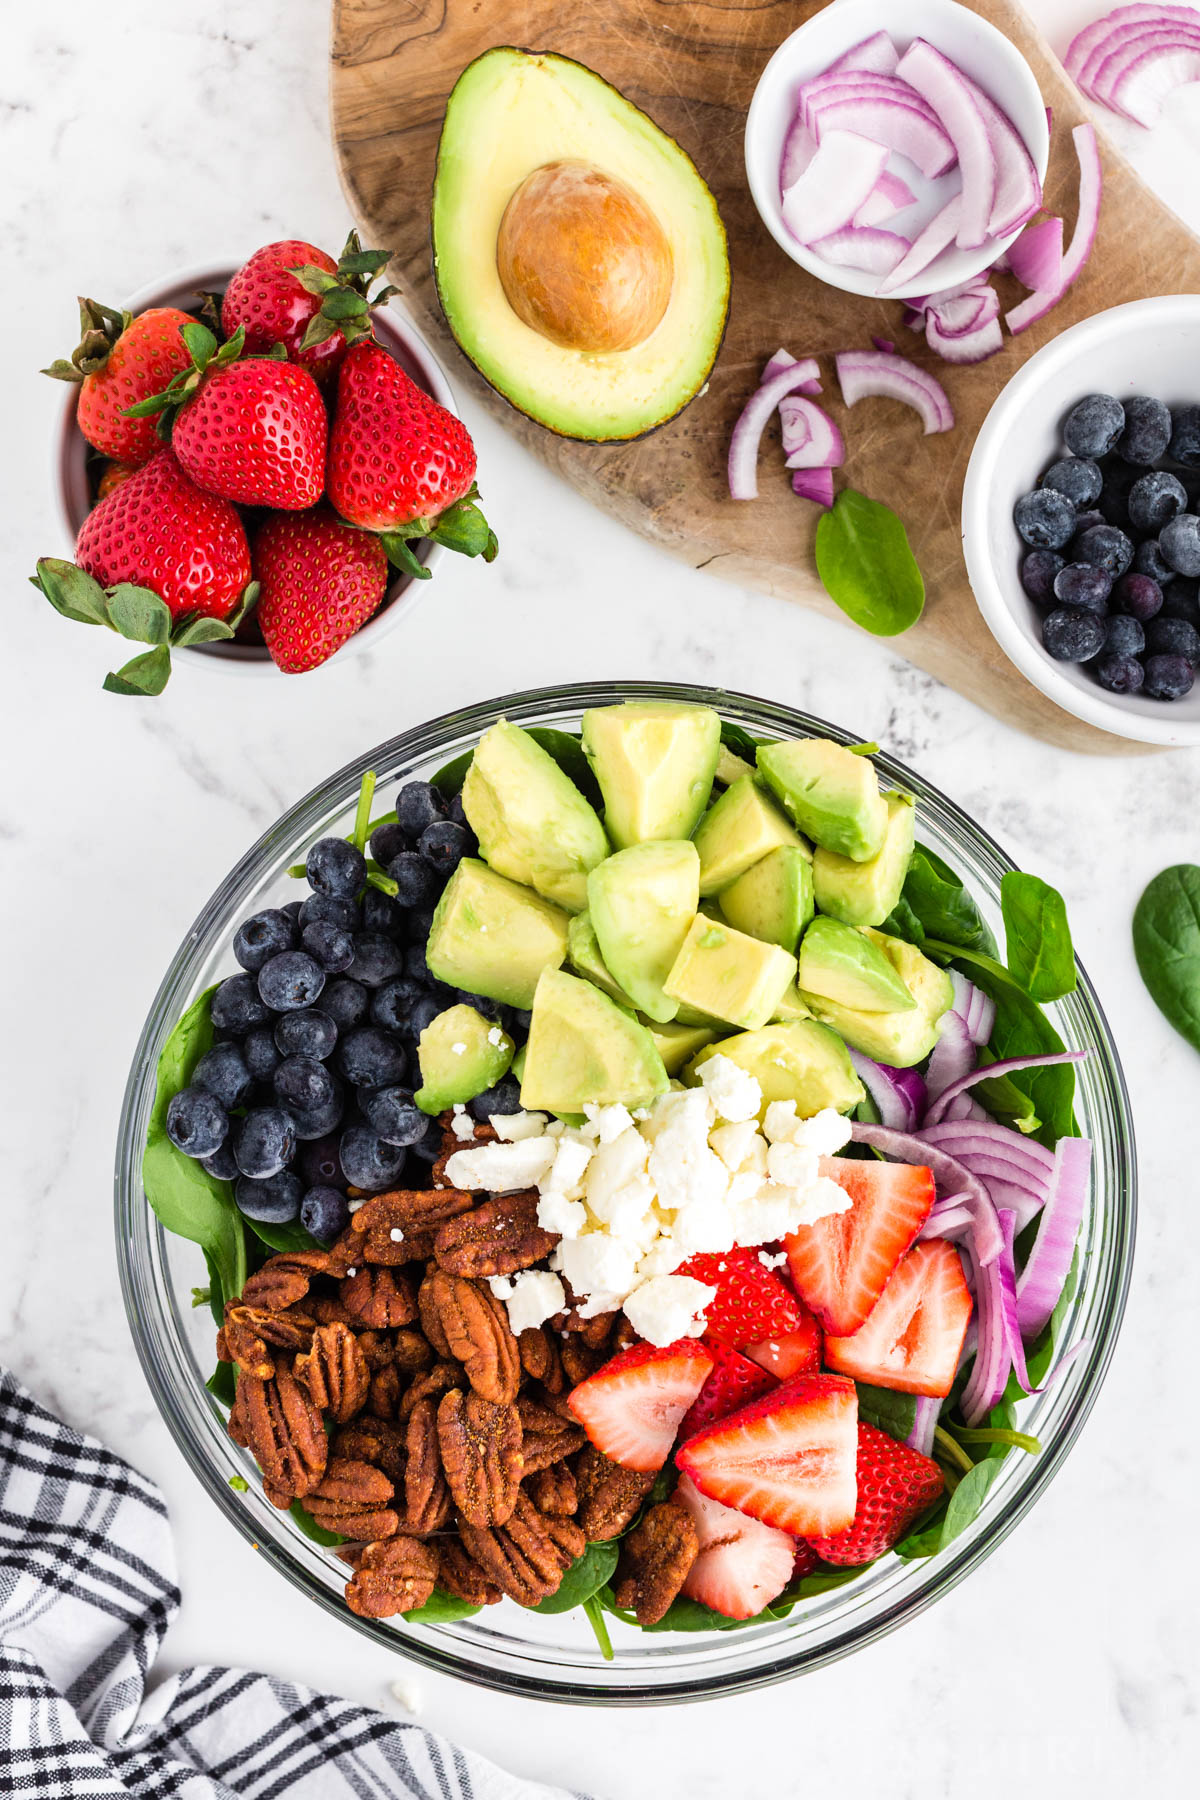 Glass bowl filled with spinach, pecans, cut strawberries, cut avocado, blueberries, onions, feta cheese, bowl with strawberries, half an avocado, bowl with blueberries, bowl with onions, black and white checked linen on a white marble countertop.